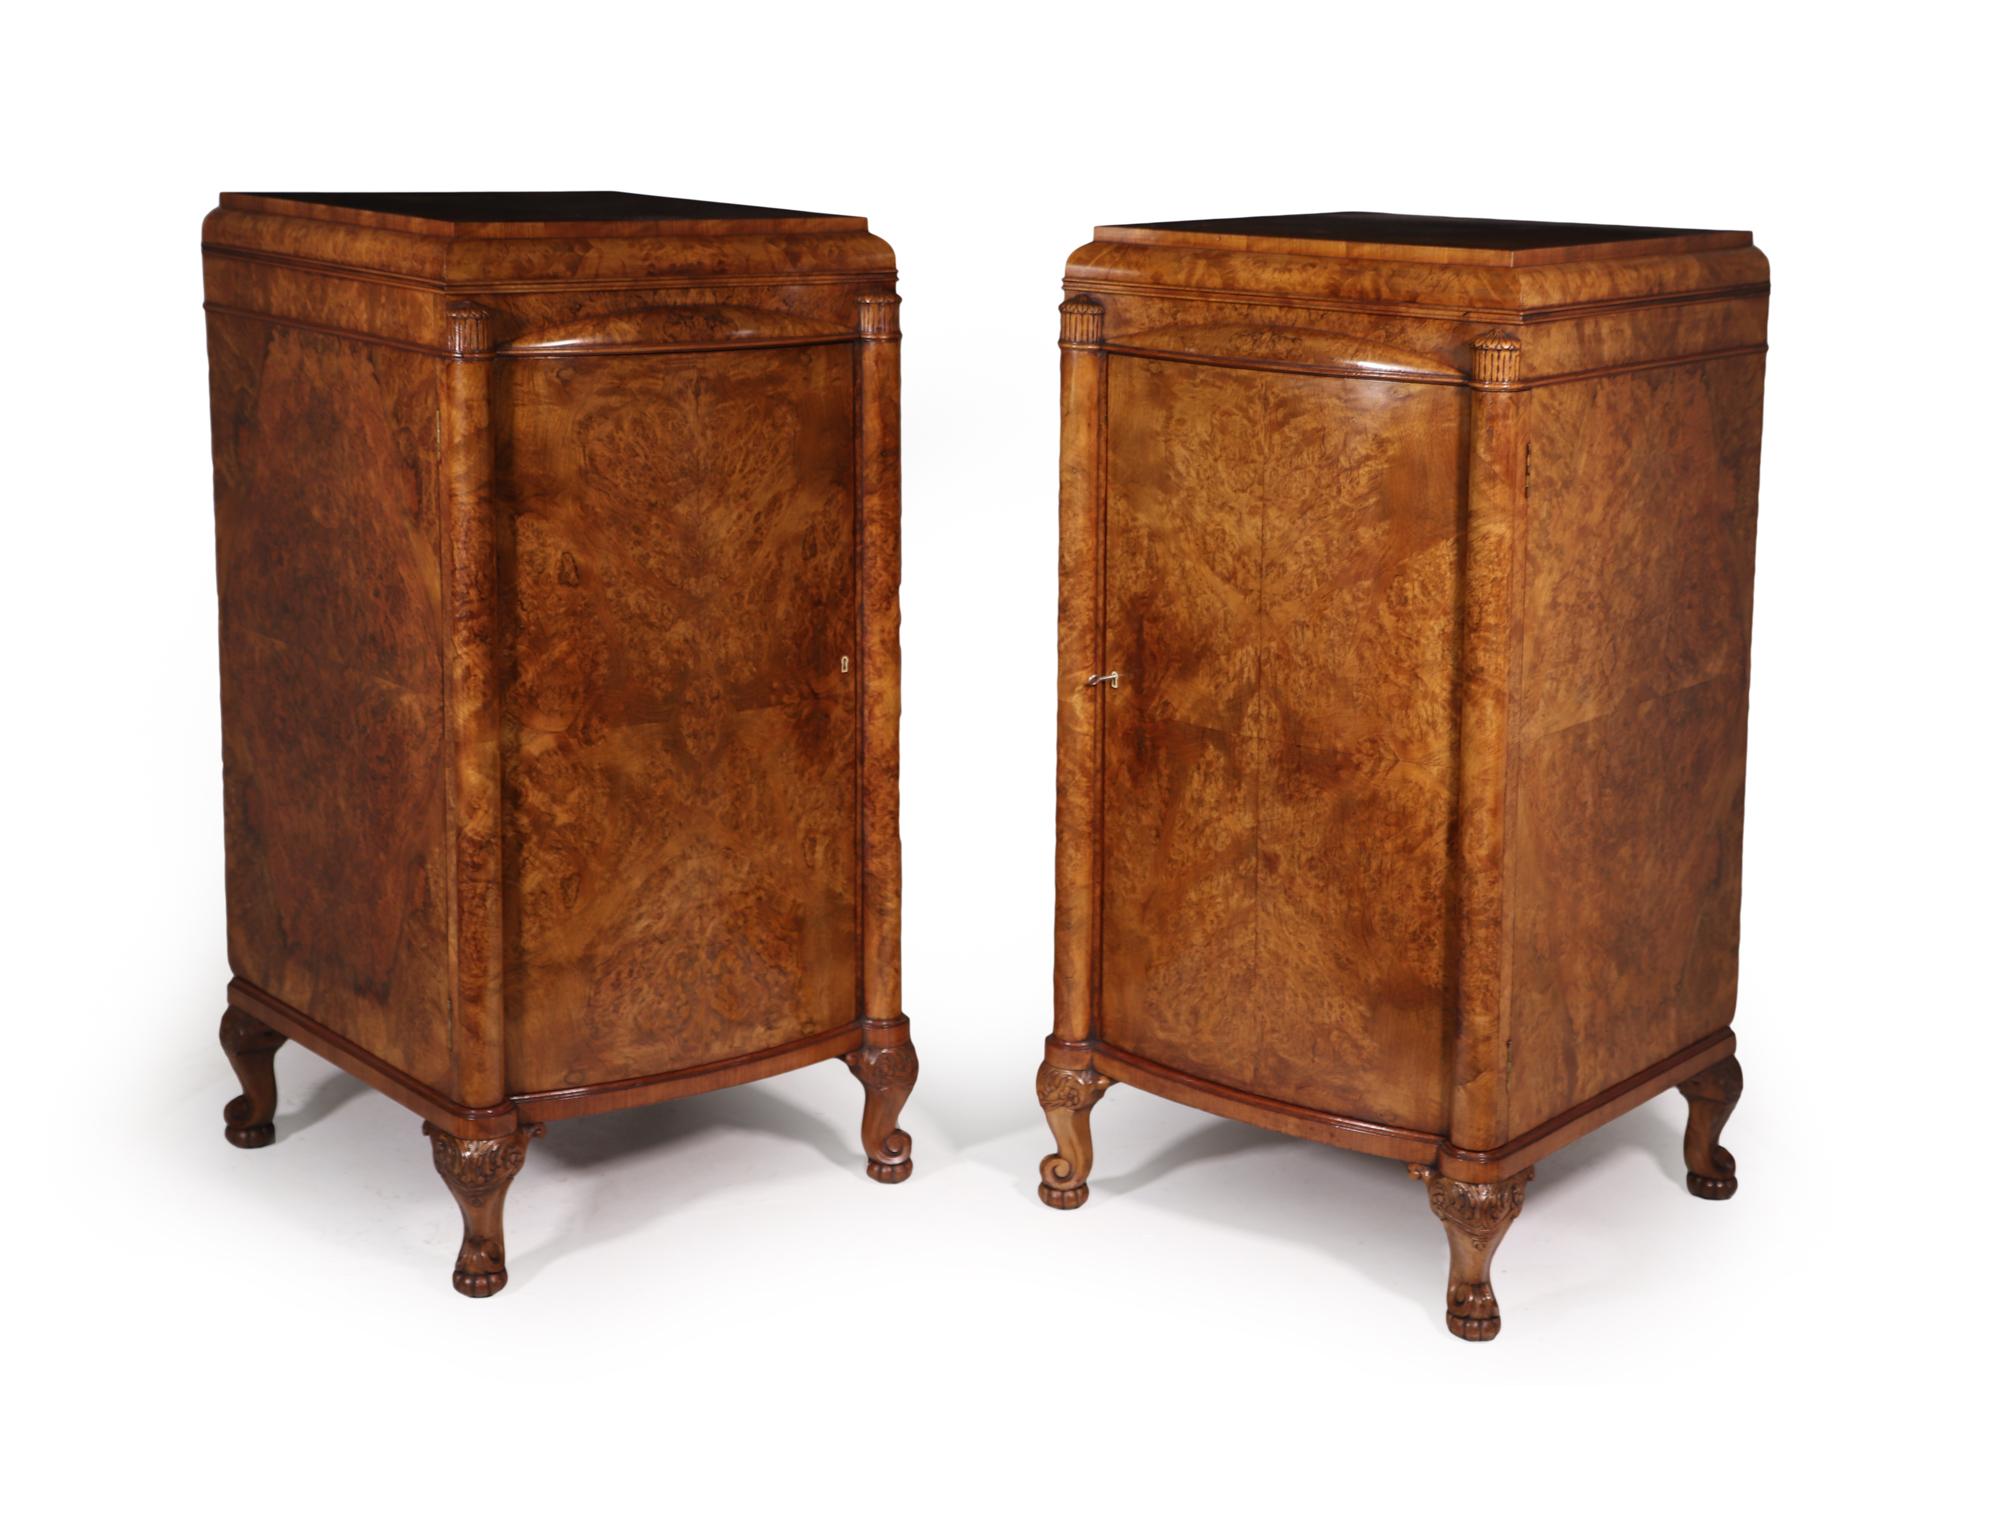 A very large pair of cabinets, please check dimensions below, English made in the Art Deco period c1930 these cabinets are exceptional quality with great attention to detail gently bow fronted with columns either side of the door and standing on a